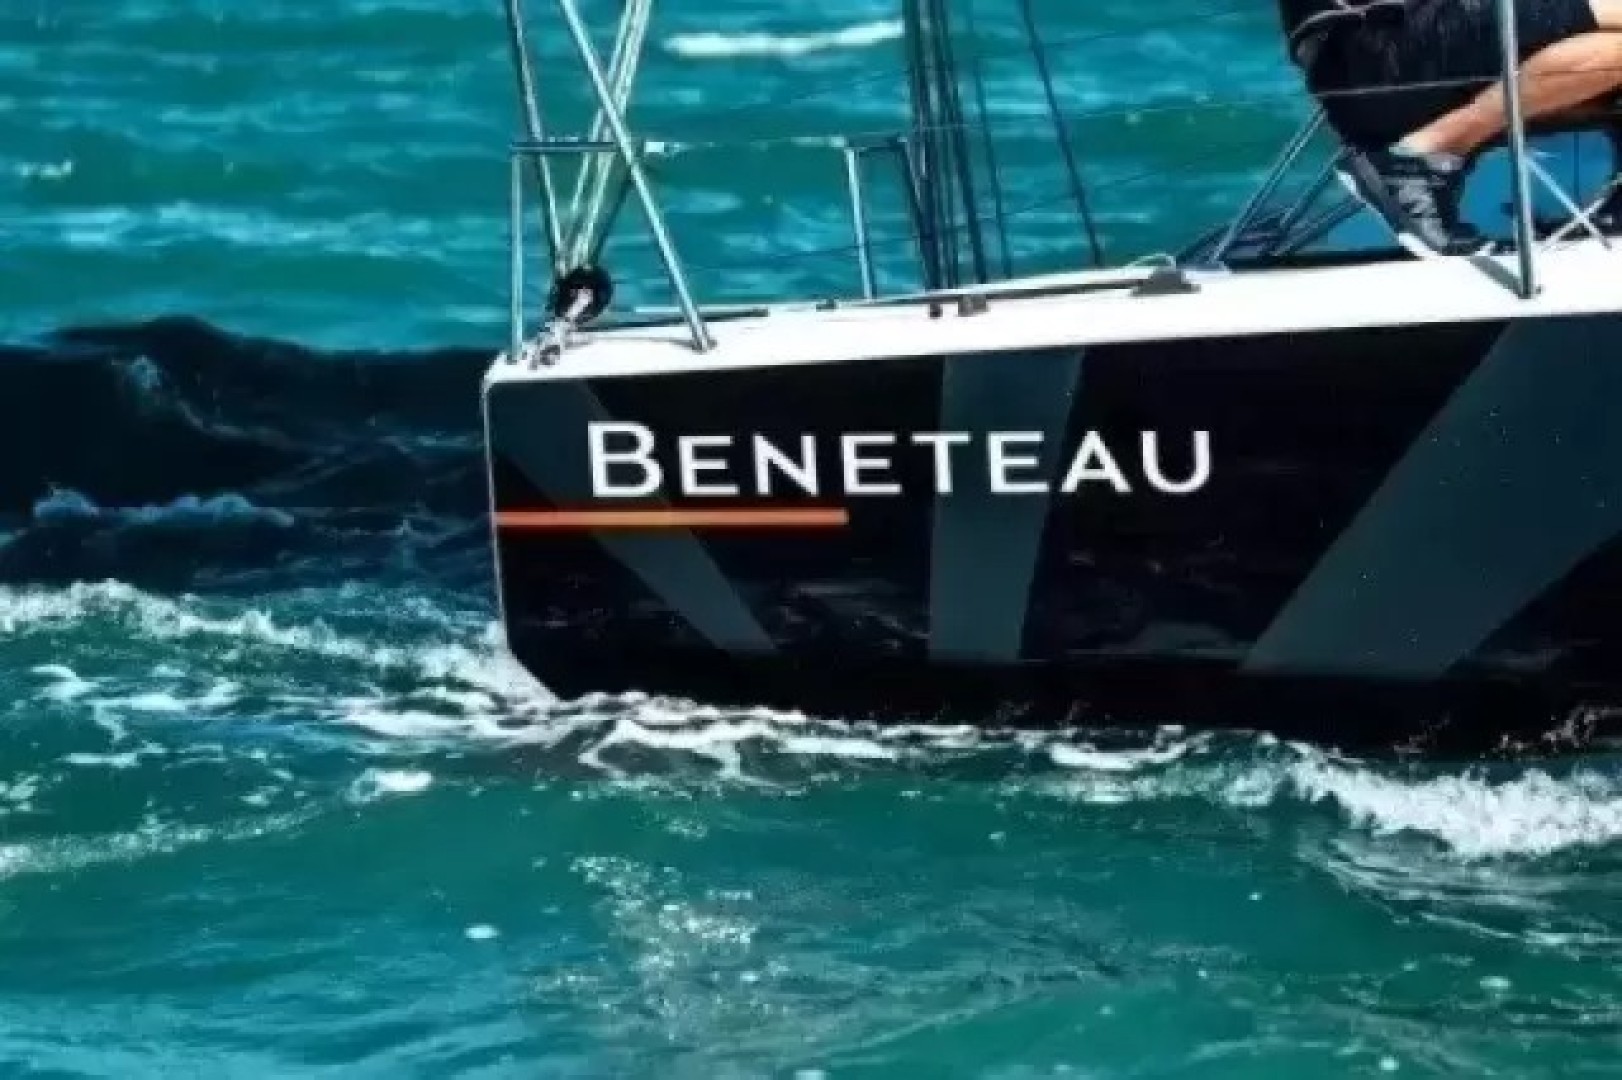 Beneteau brings its suppliers on board for an initiative to drive CSR progress with the rating agency EcoVadis